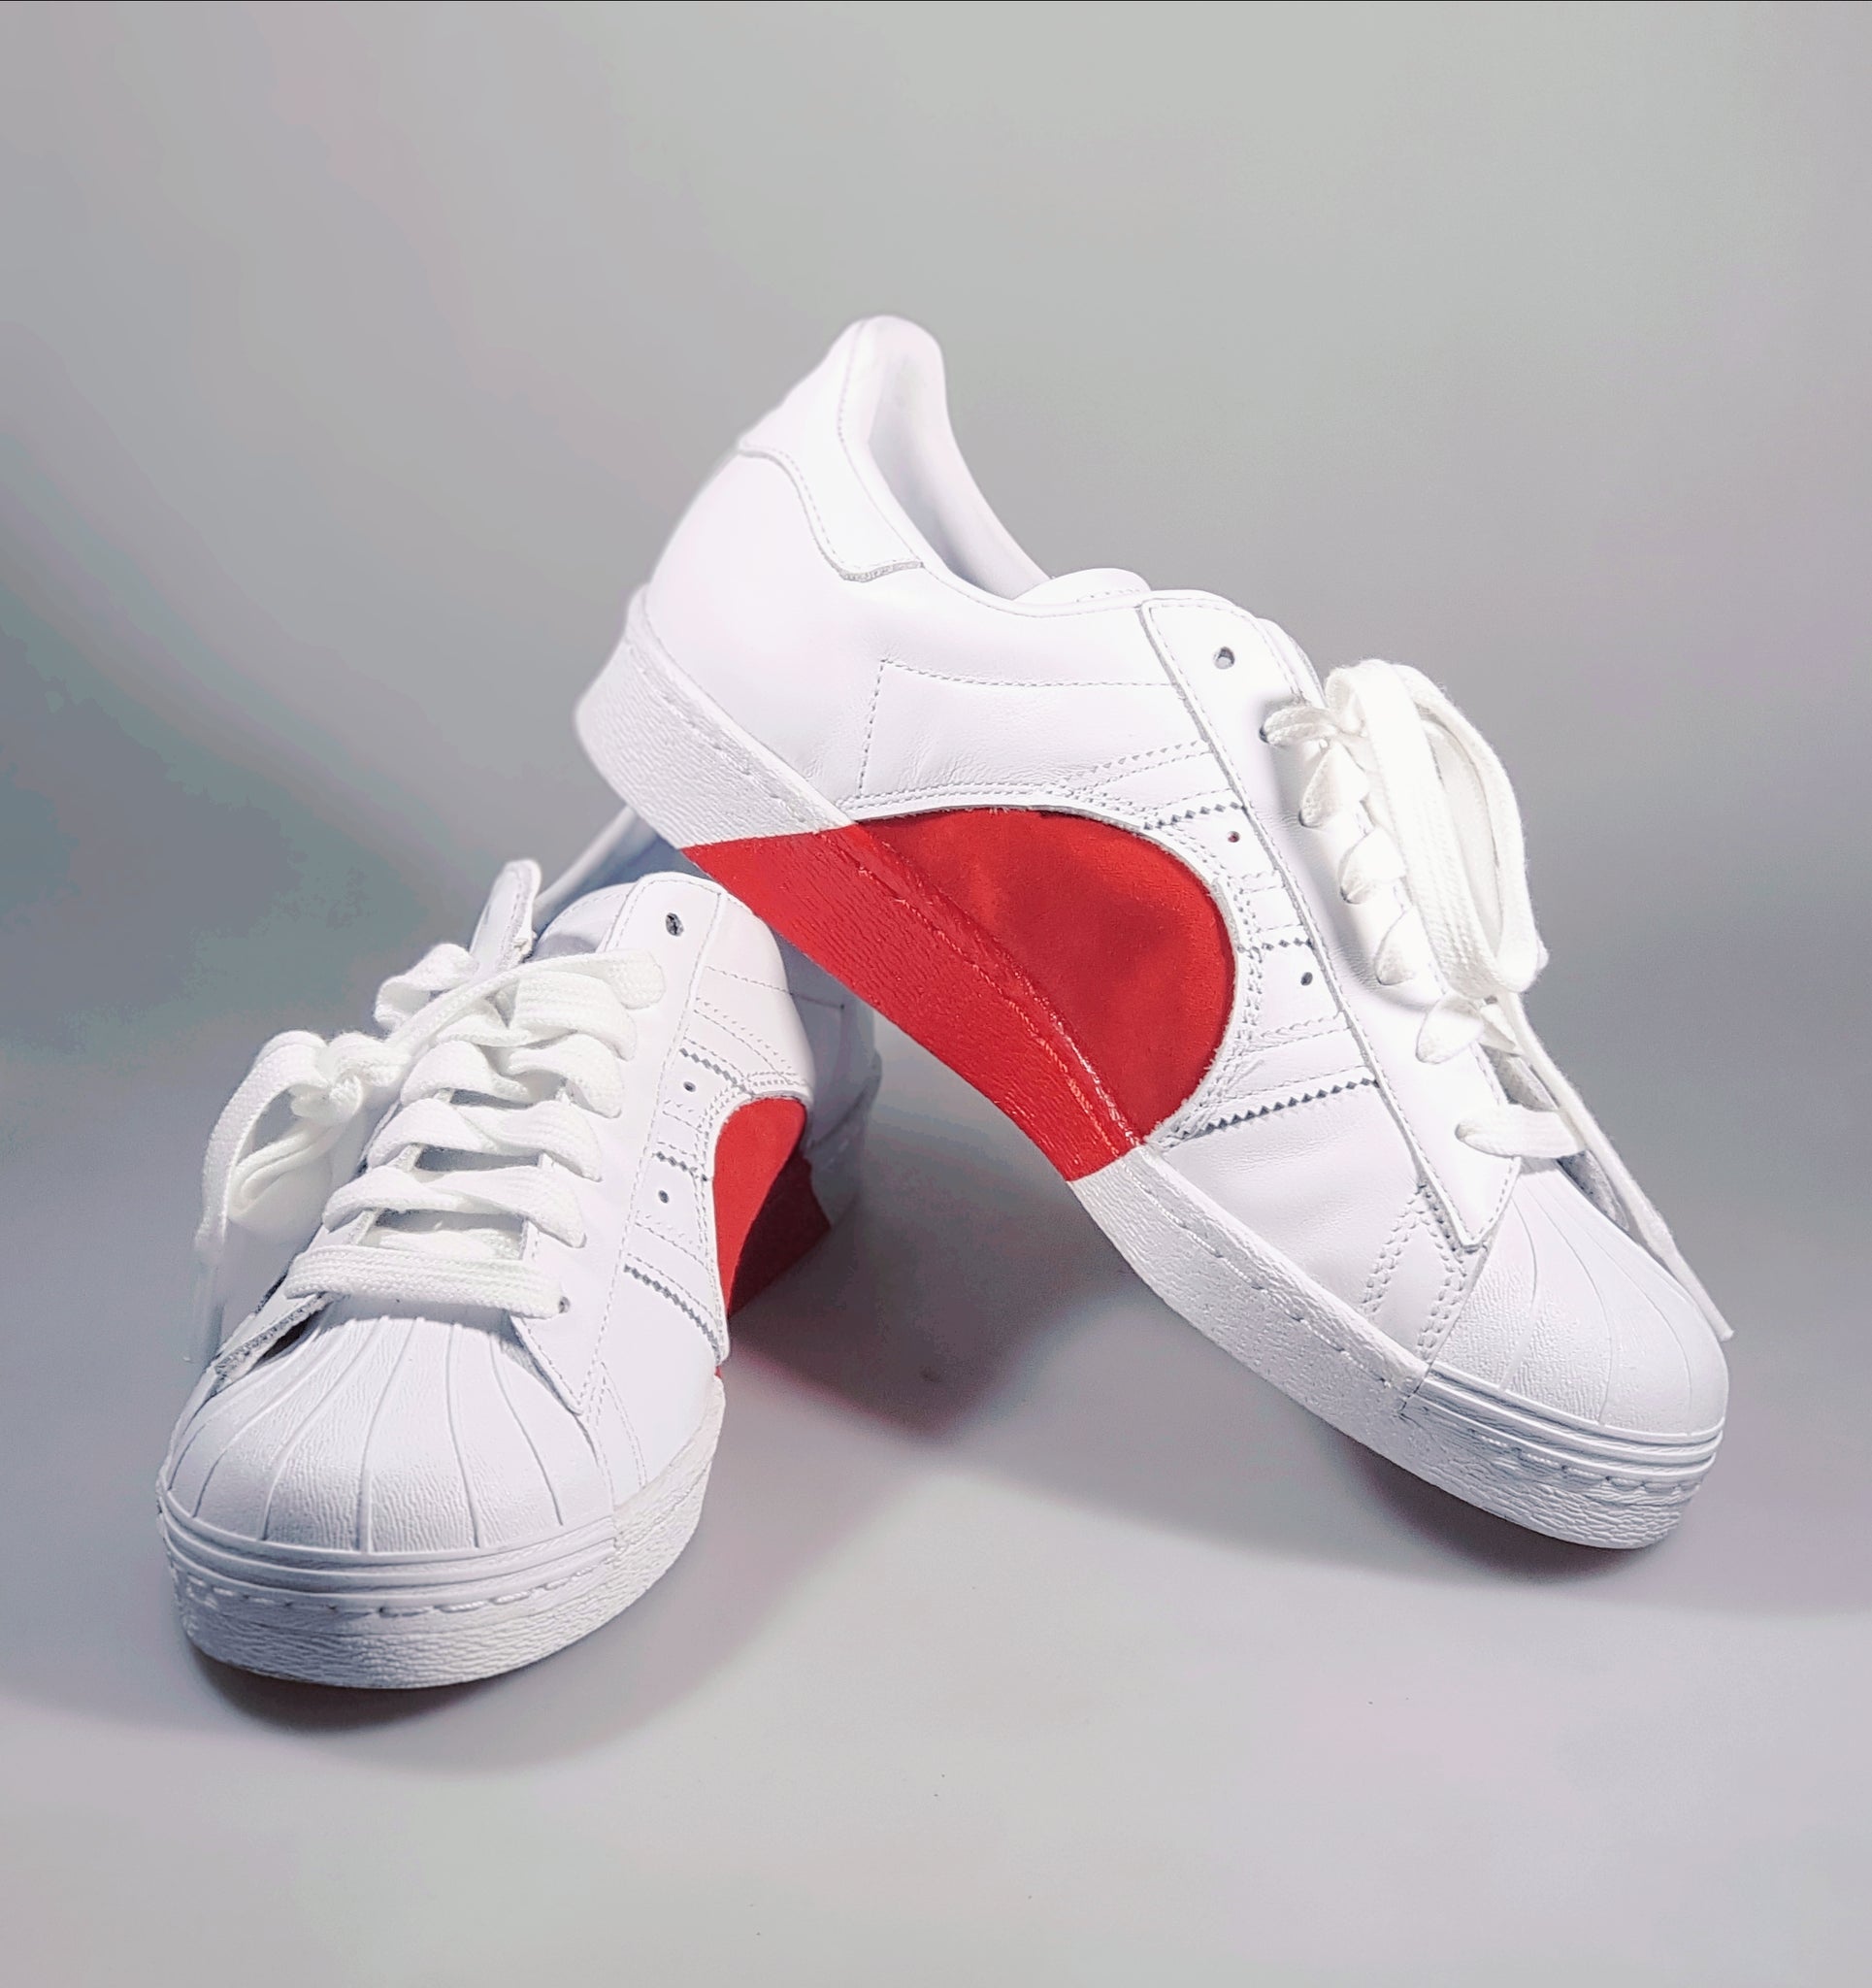 Adidas Superstar Half Heart Limited Edition – House of Ebuyph